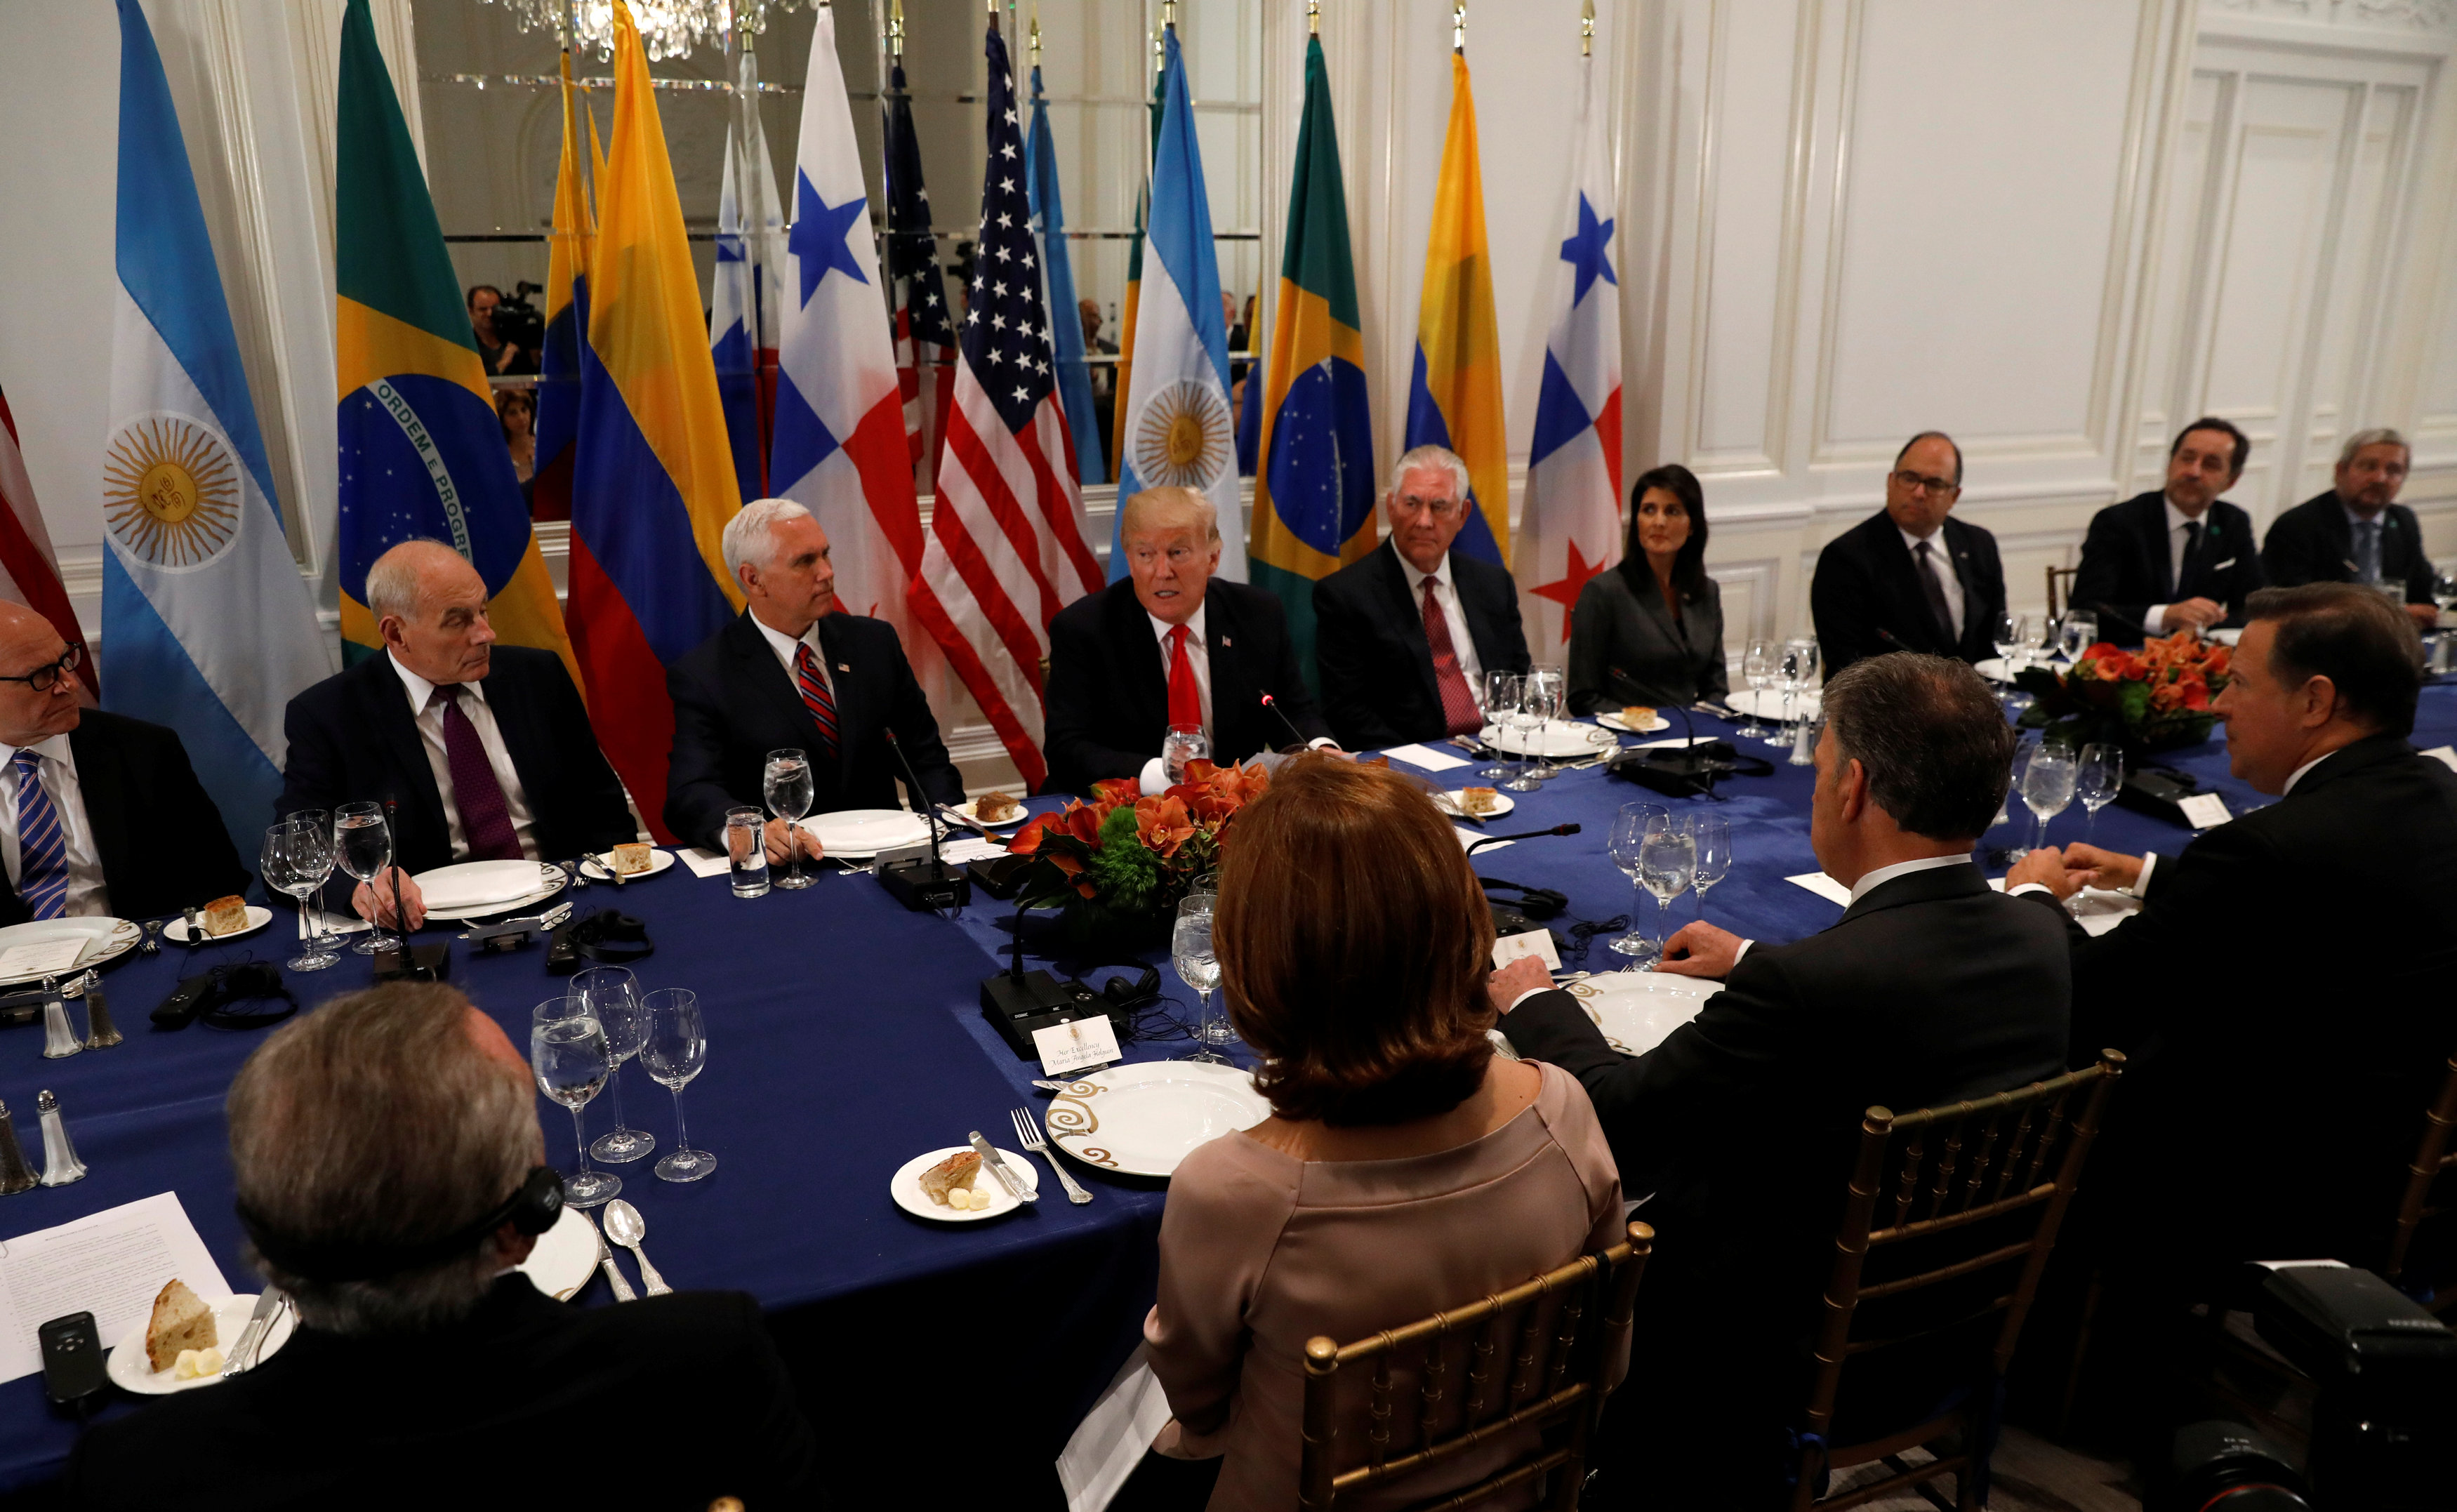 U.S. President Donald Trump speaks his mind at a working dinner with Latin American leaders in New York City, Sept. 18, 2017.